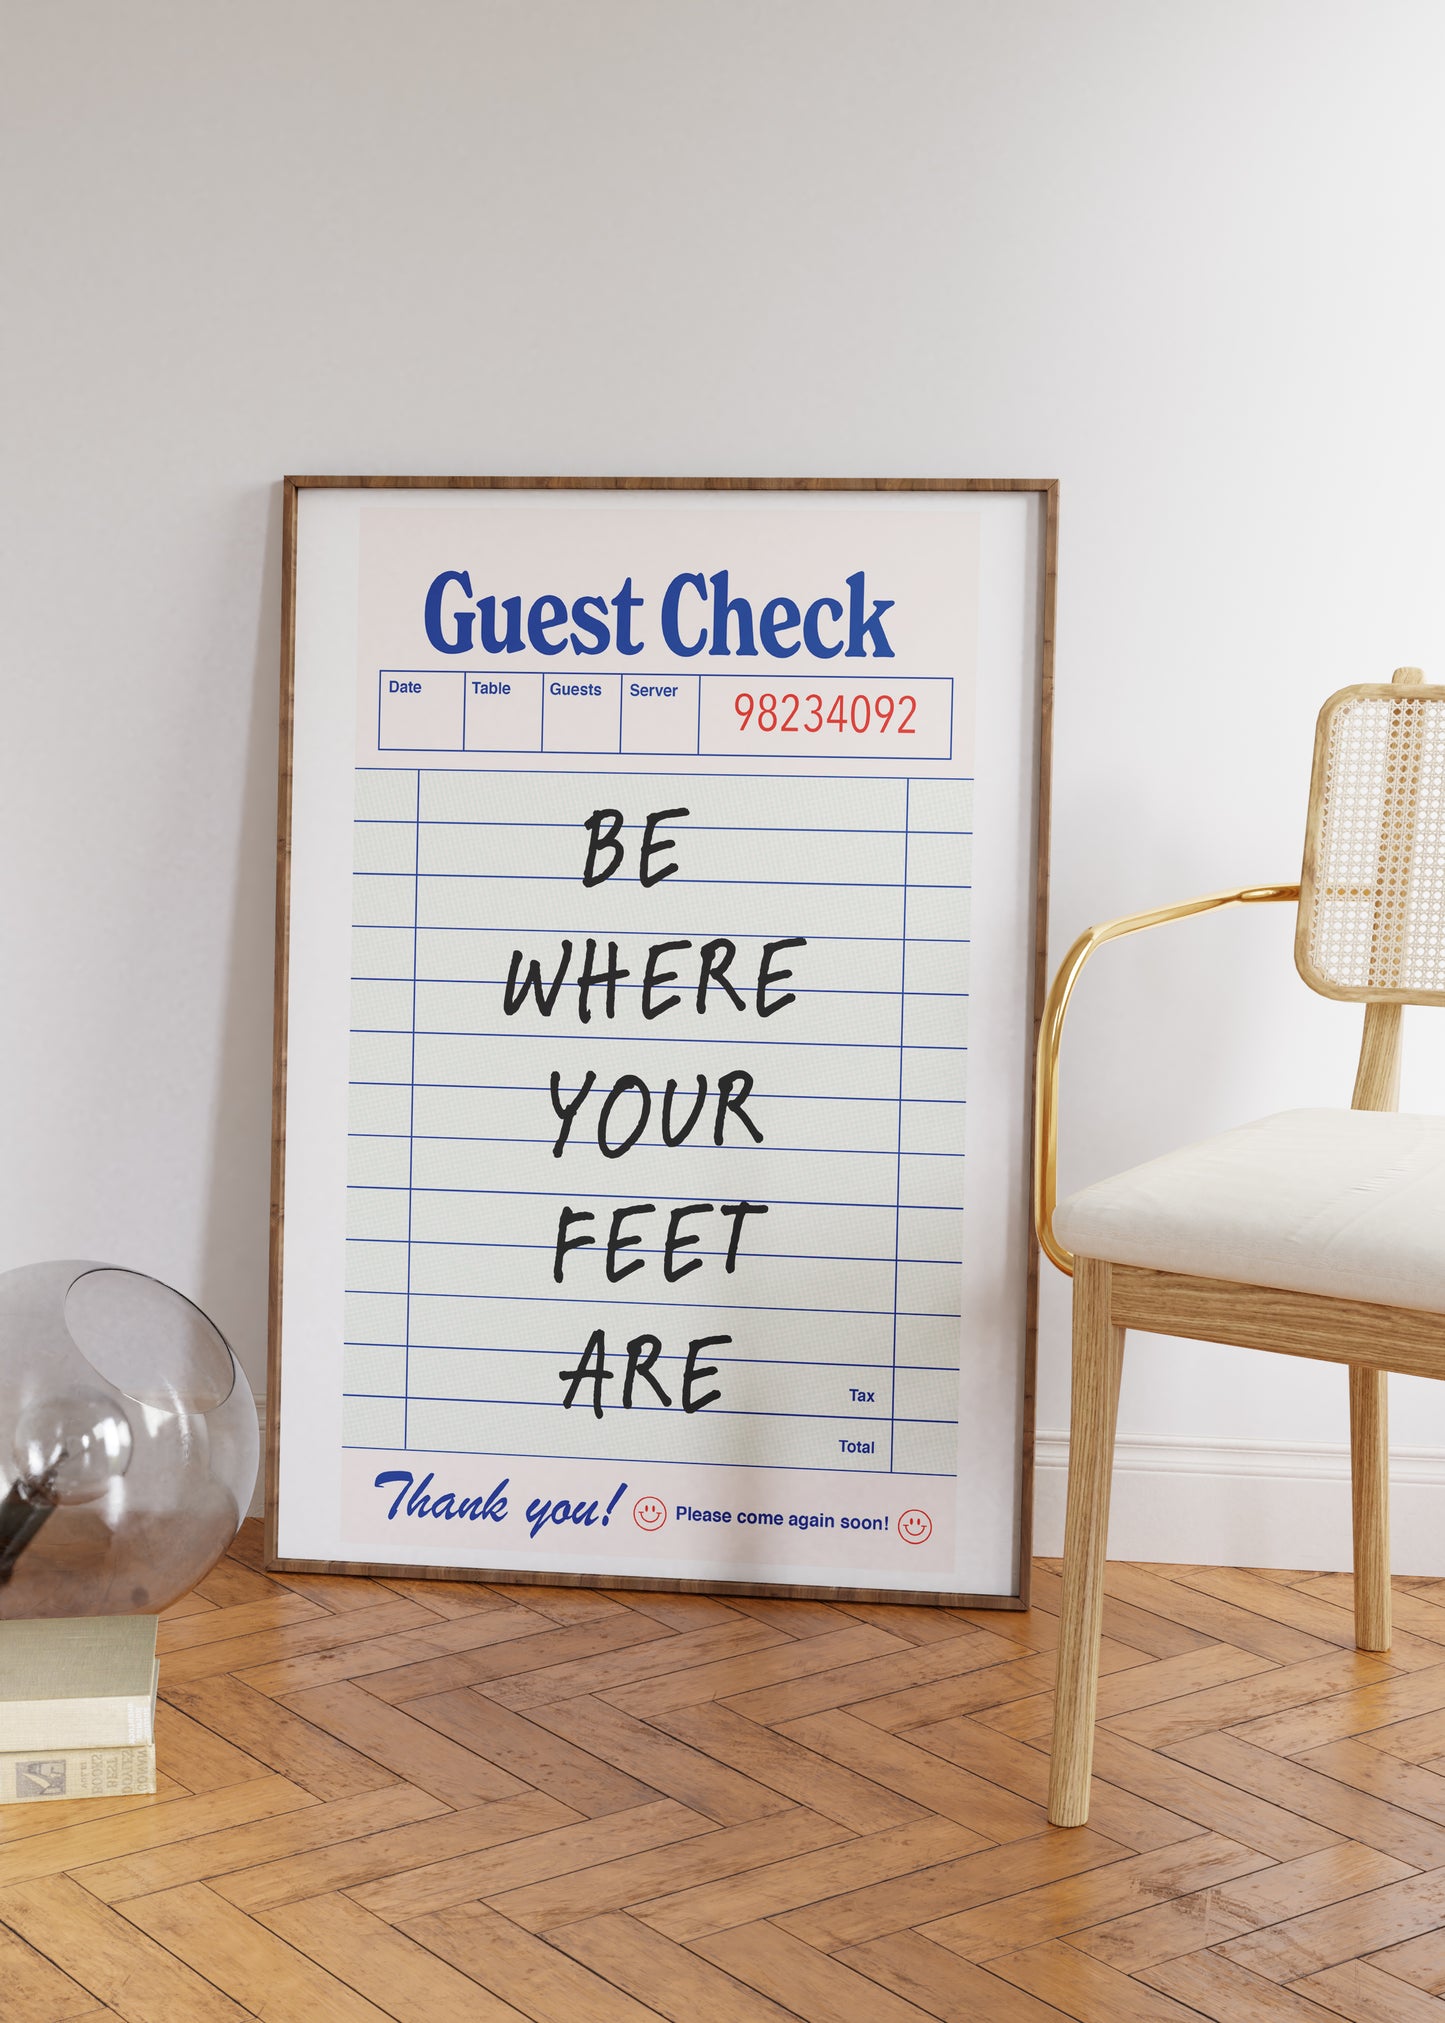 Be Where Your Feet Are - Guest Check Poster